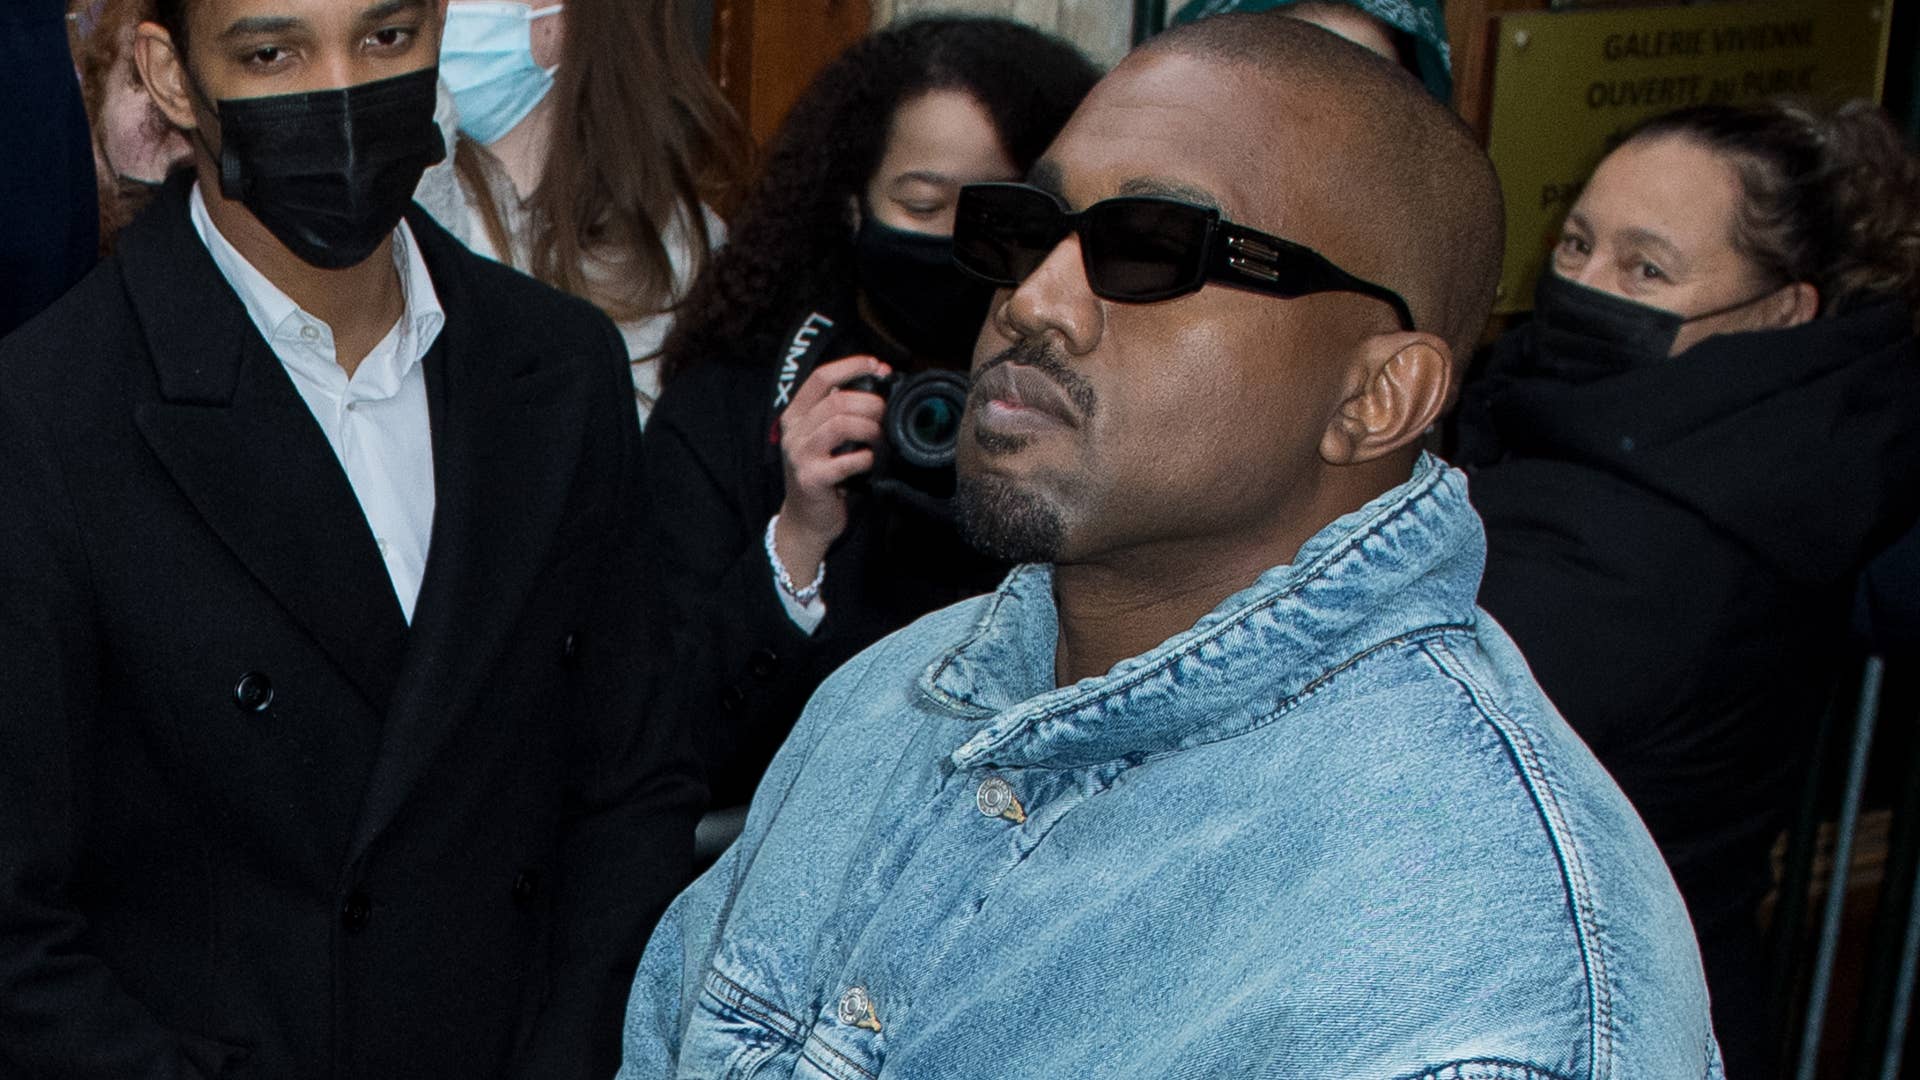 Ye is pictured in a denim fit